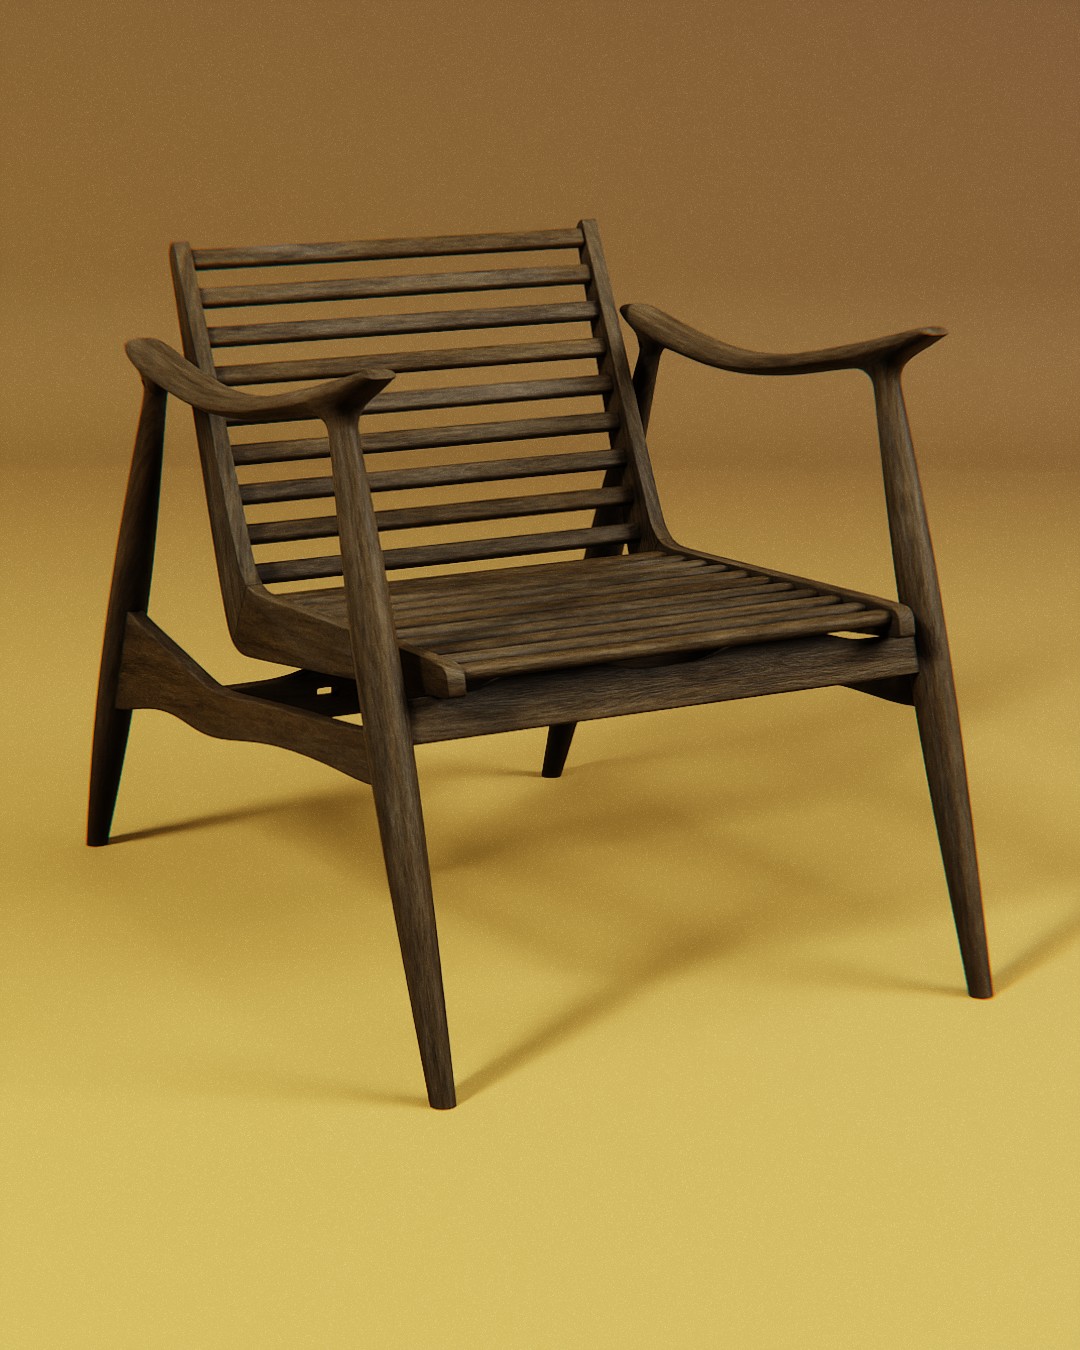 image of a wooden chair rendered out and studio lit to illustrate how realistic renders can appear.